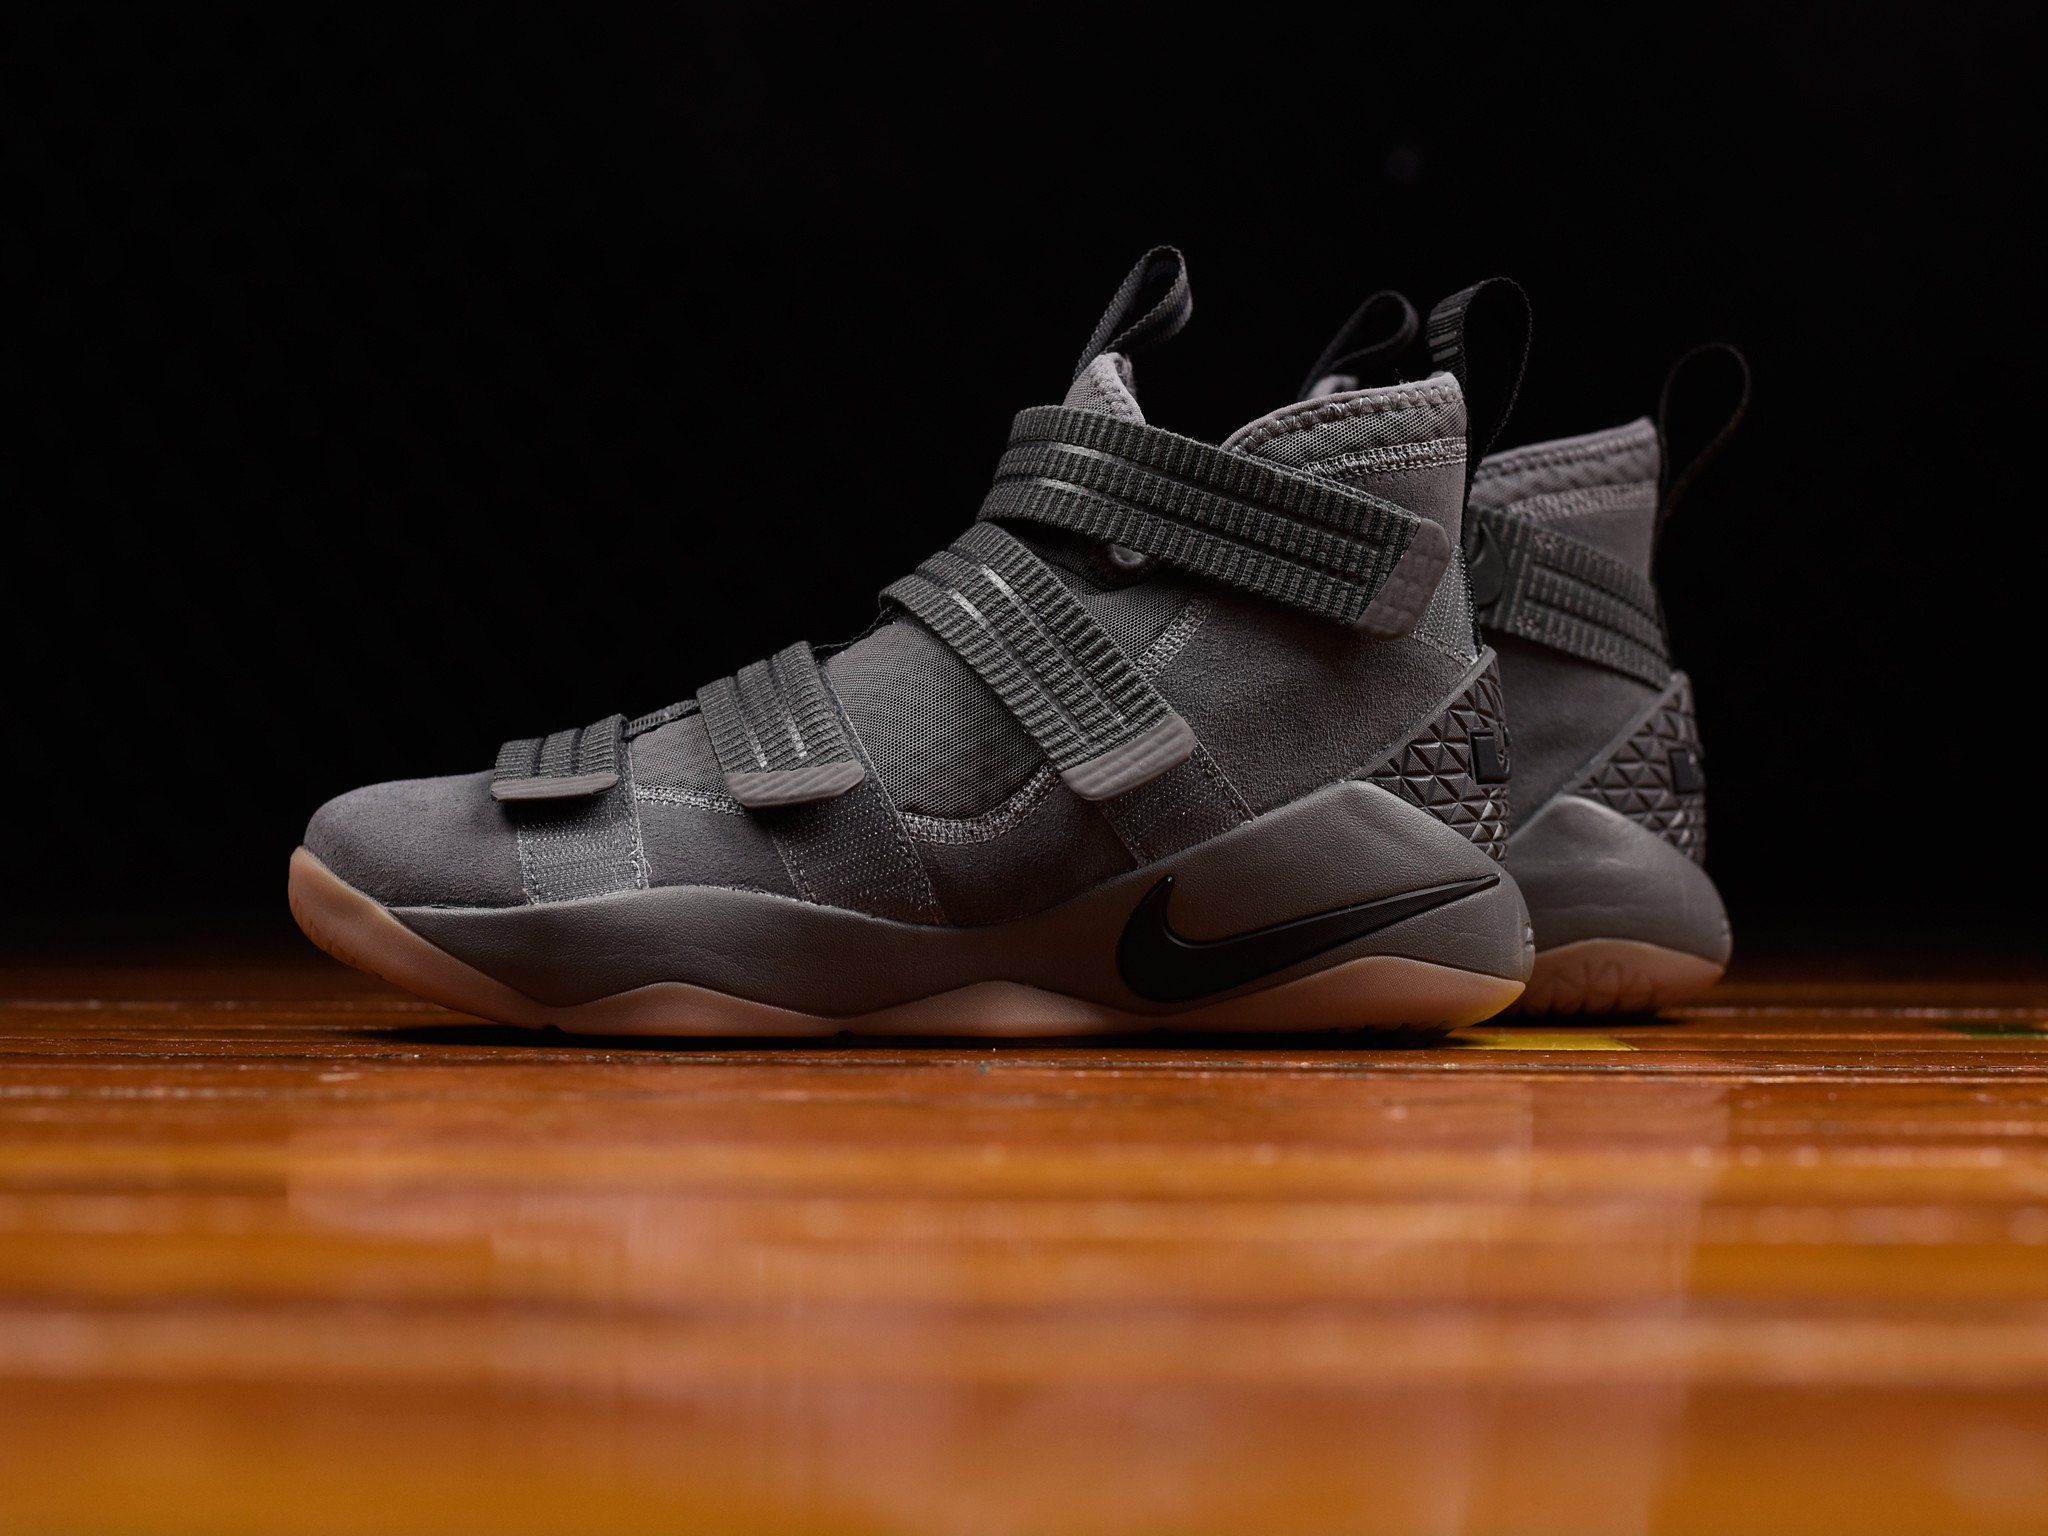 lebron soldier 11 weartesters